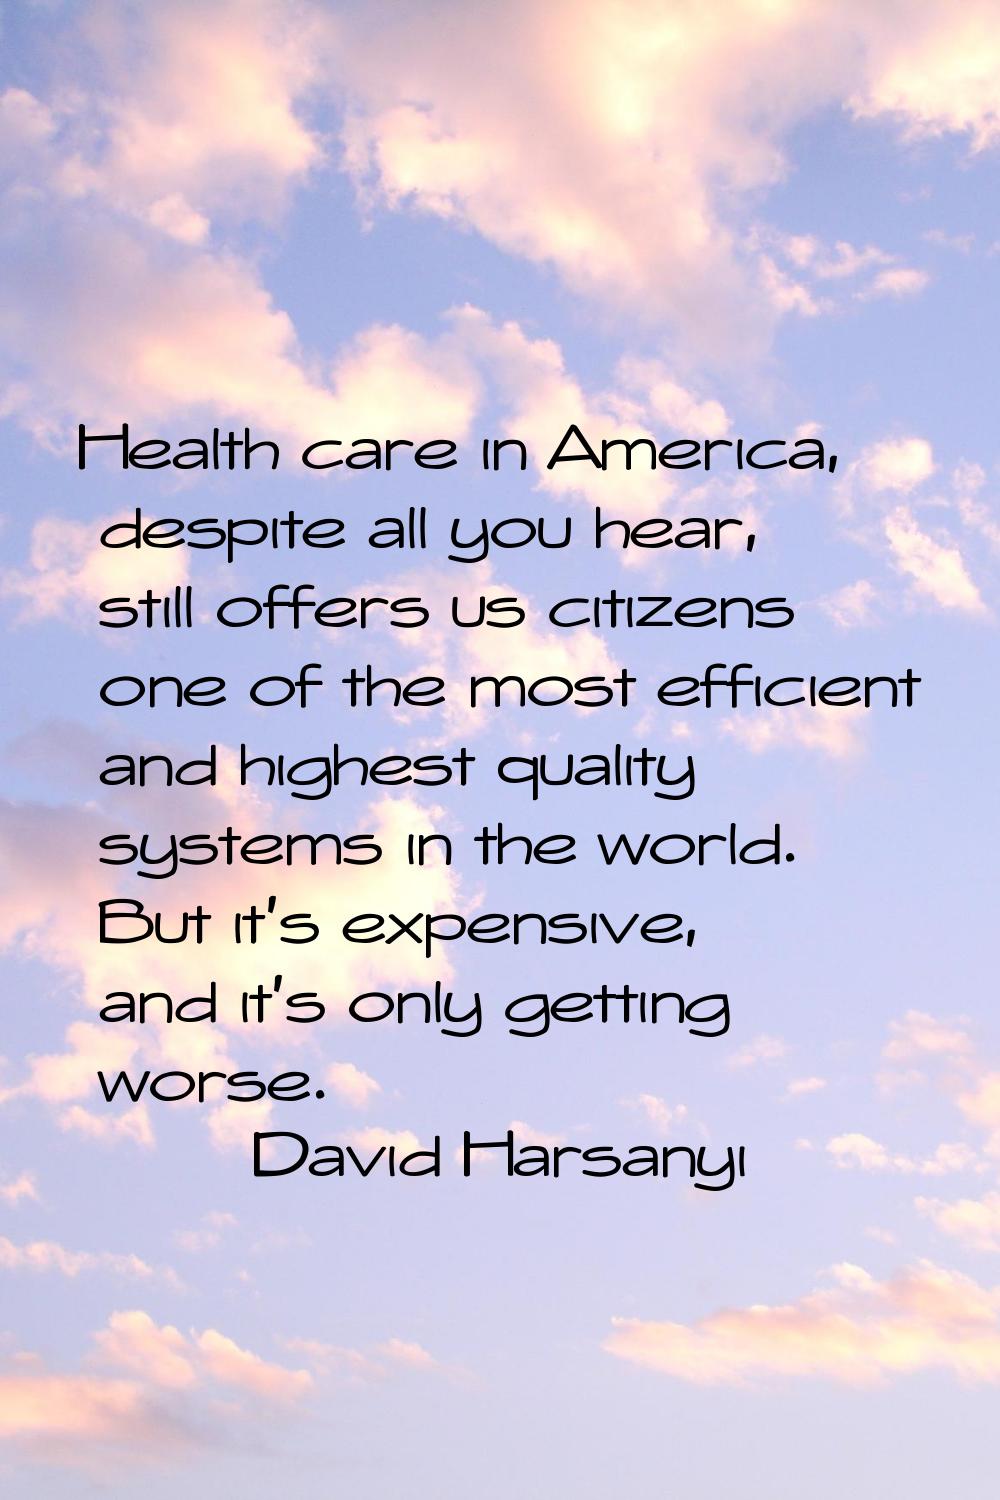 Health care in America, despite all you hear, still offers us citizens one of the most efficient an